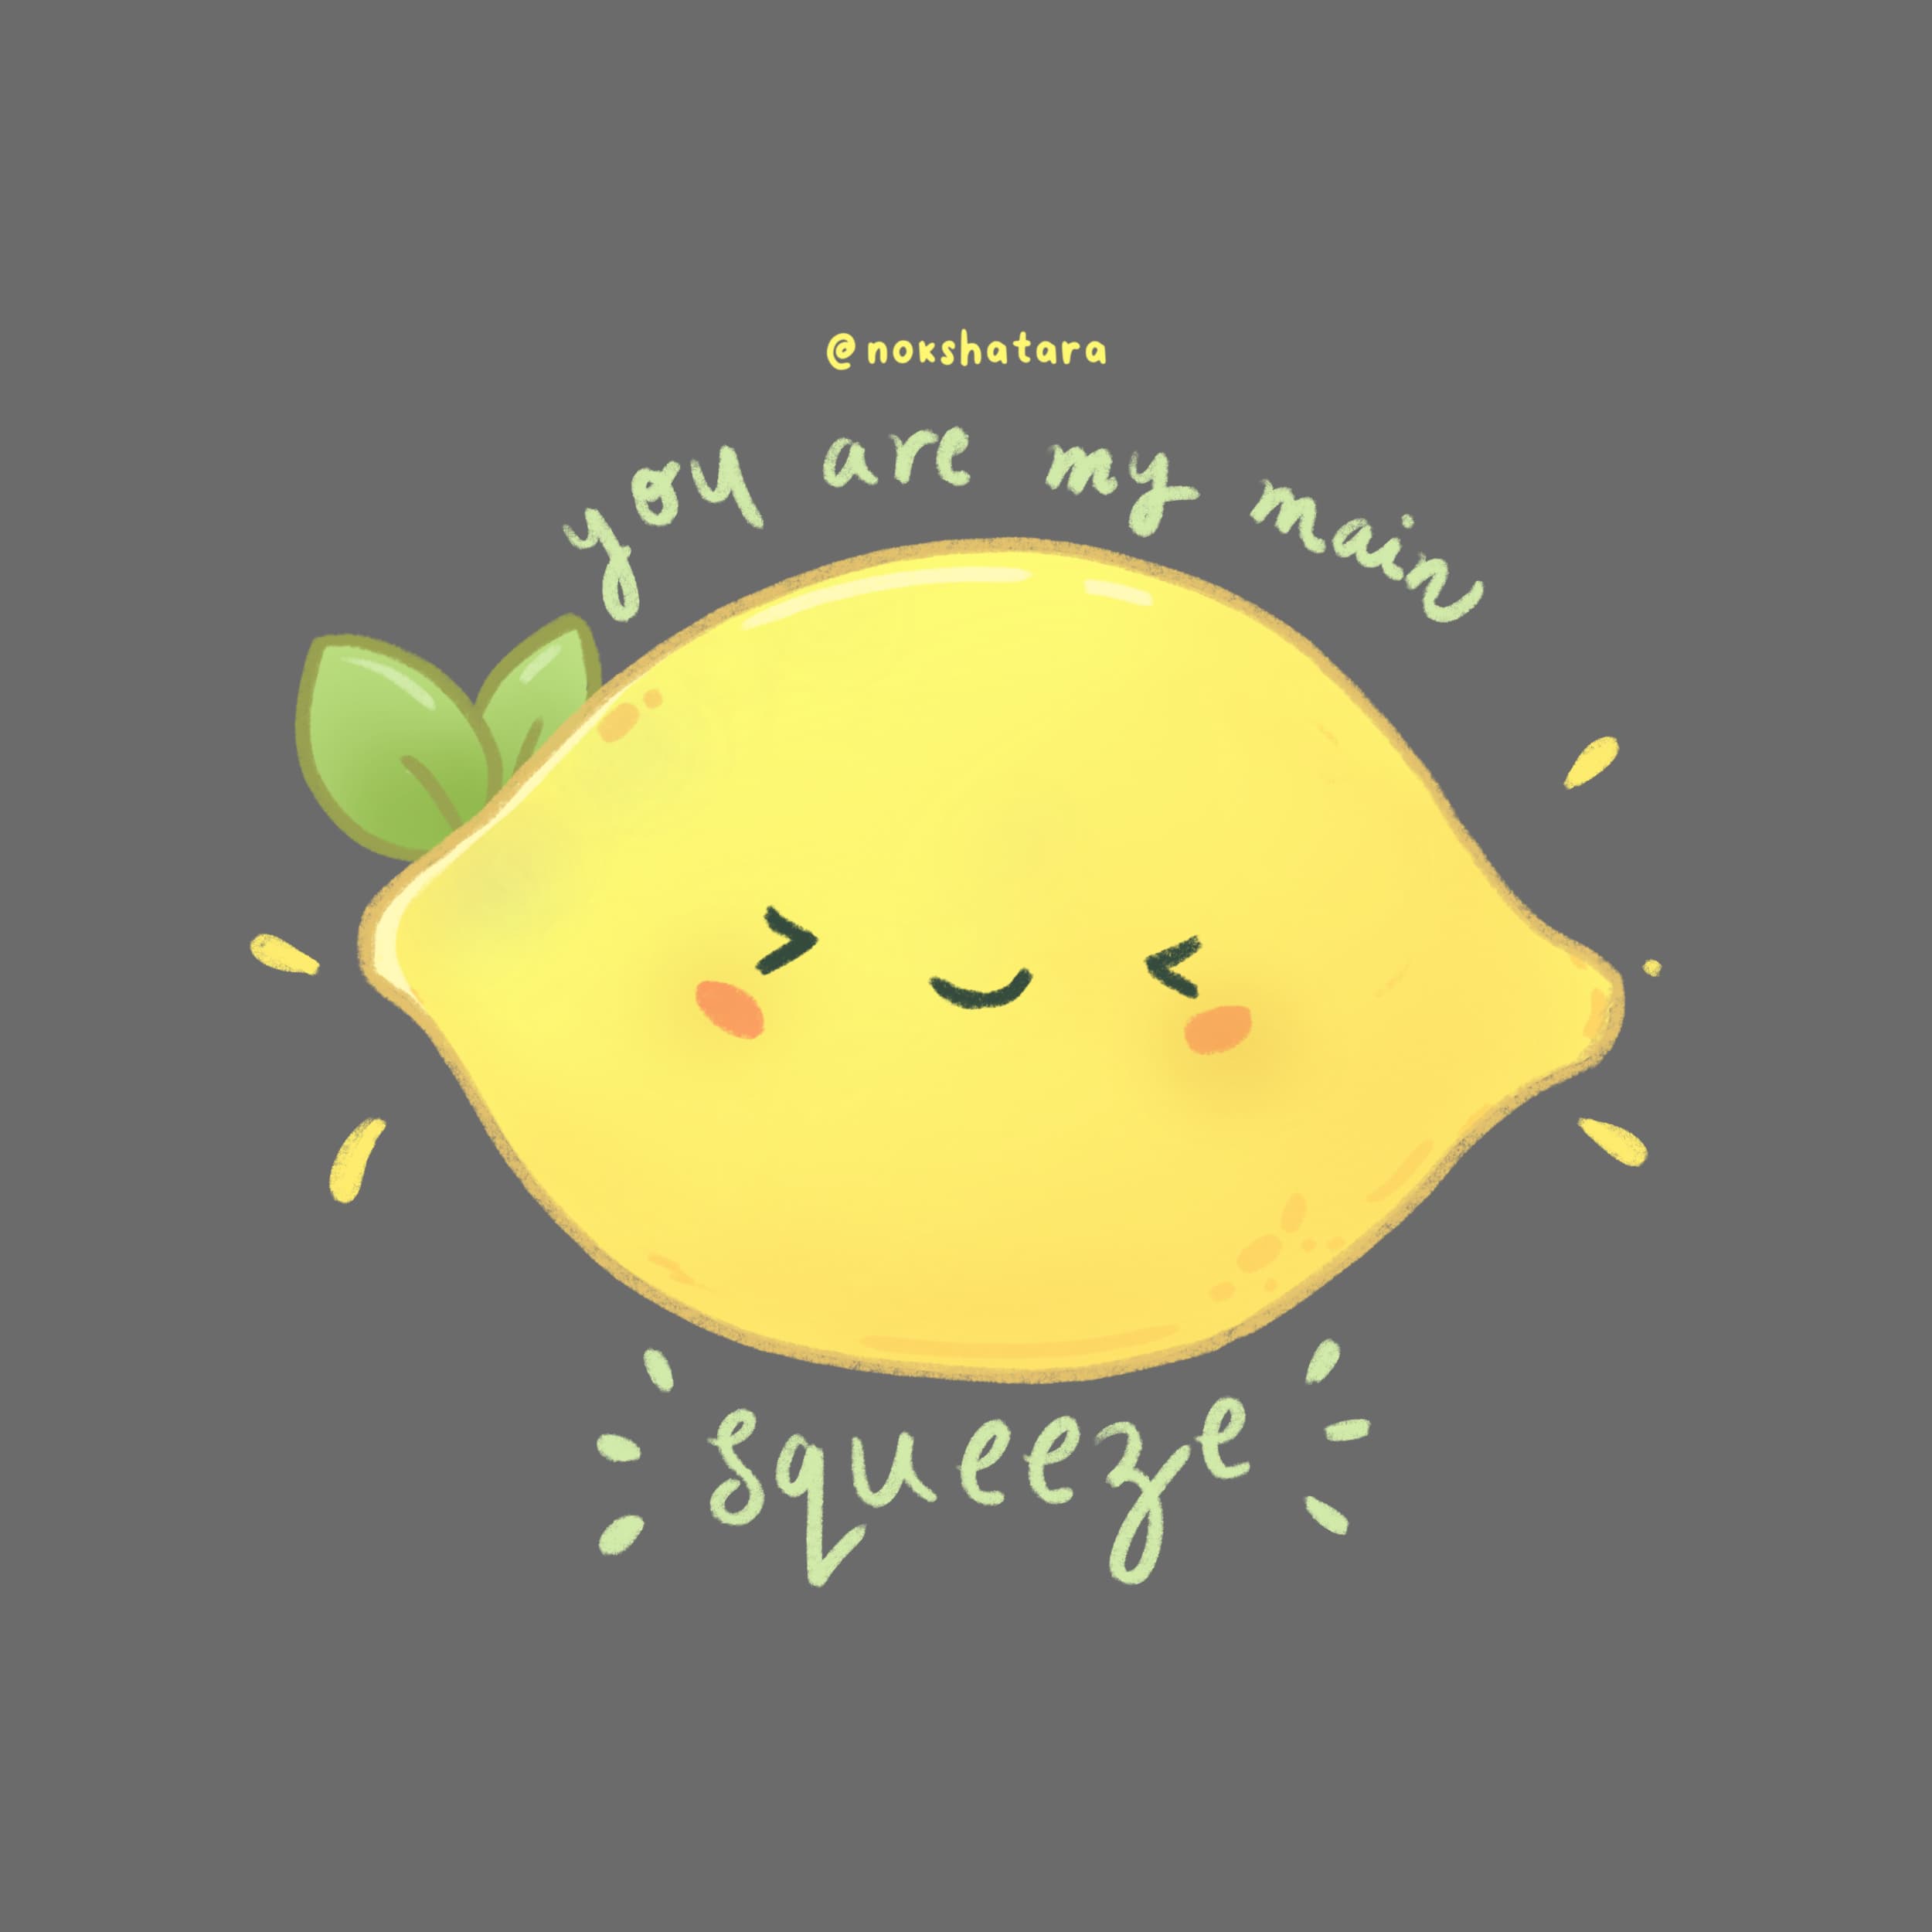 Illustration of a lemon with eyes squeezing saying you are my main squeeze!